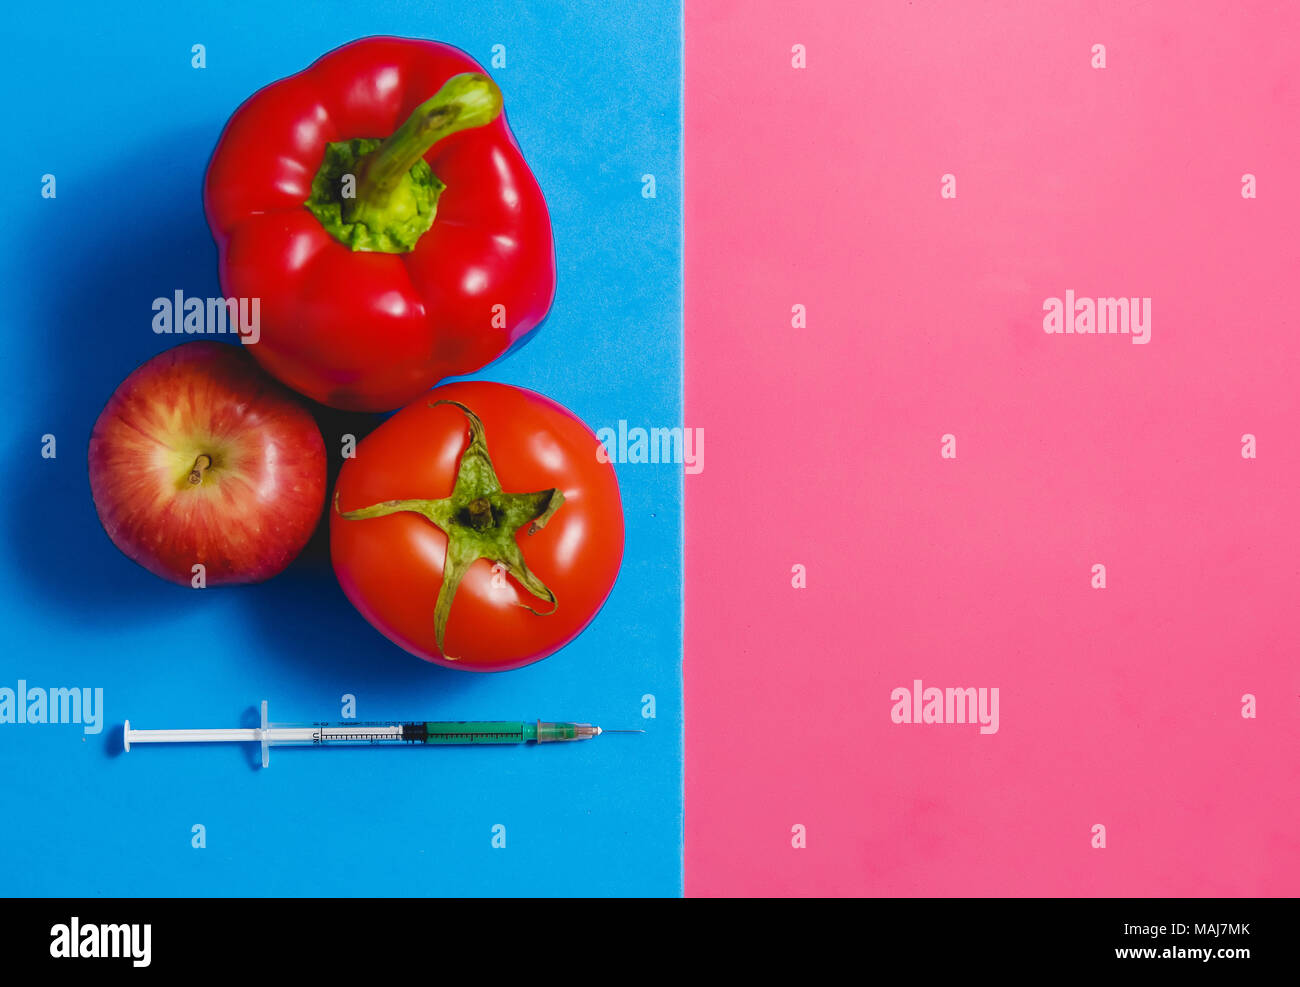 Green Liquid in Syringe, Red Tomato, Apple, Pepper. Genetically Modified Food Concept on Pink Blue. Stock Photo